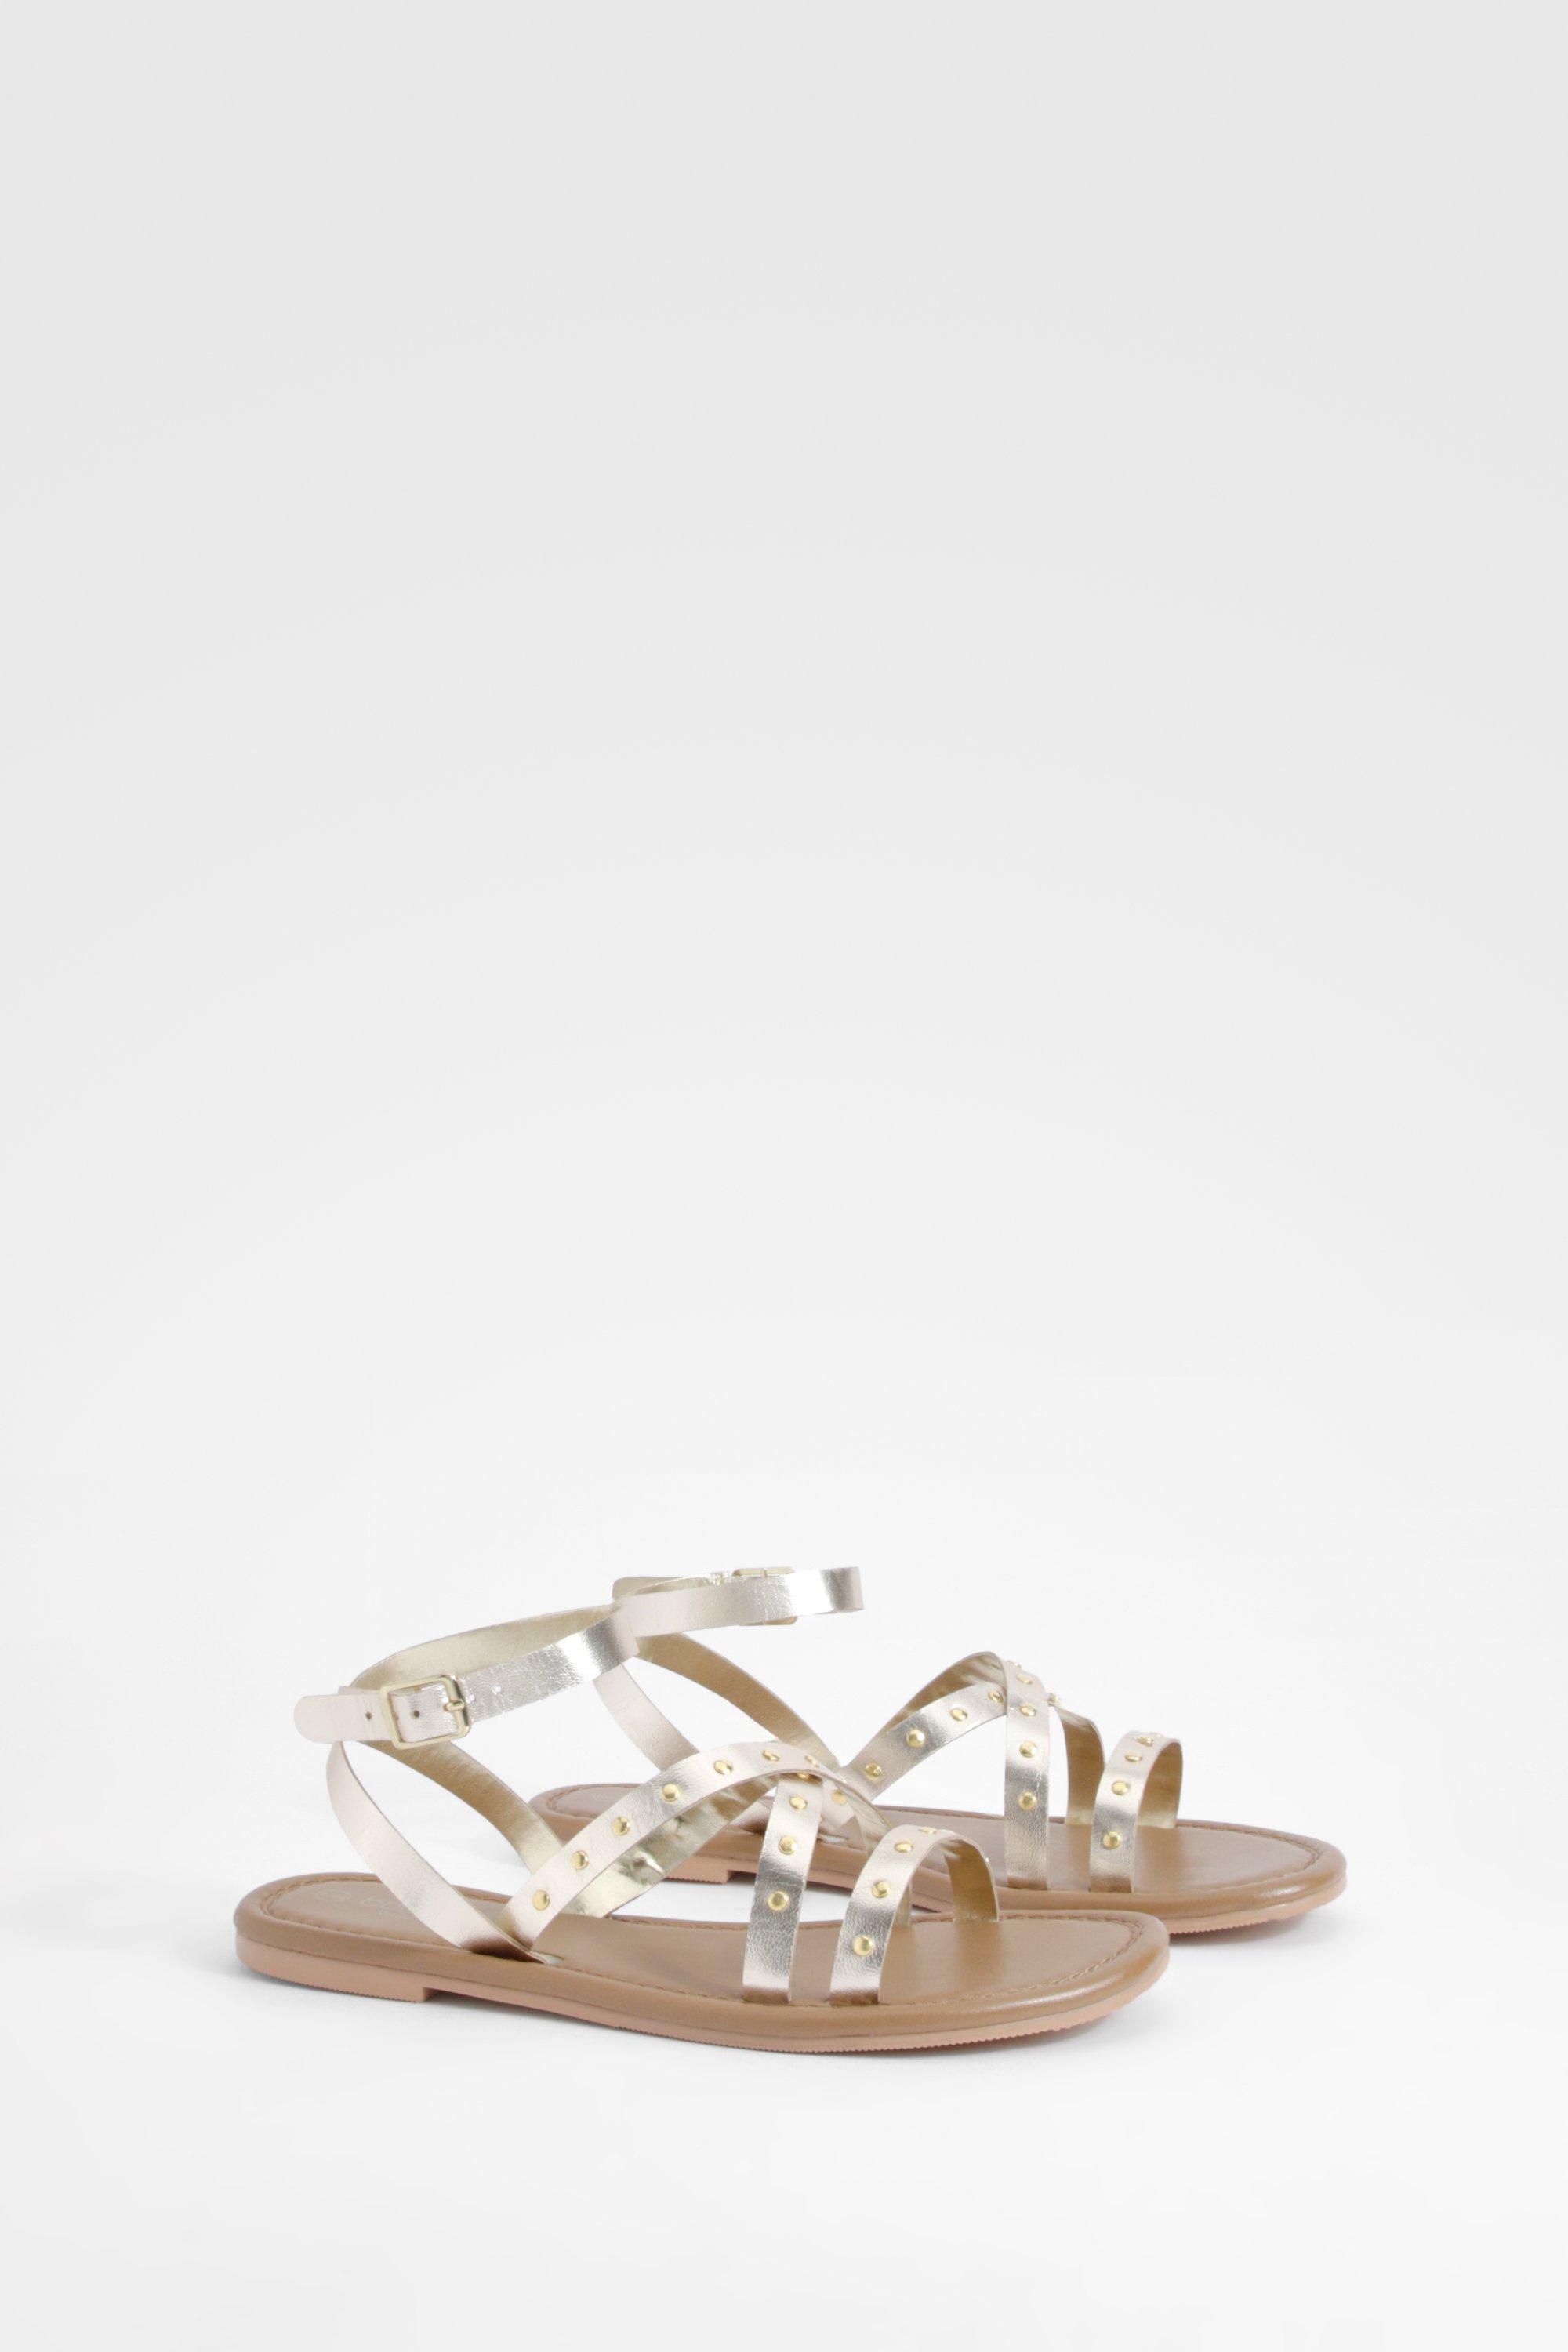 Image of Wide Fit Leather Studded 2 Part Sandals, Metallics